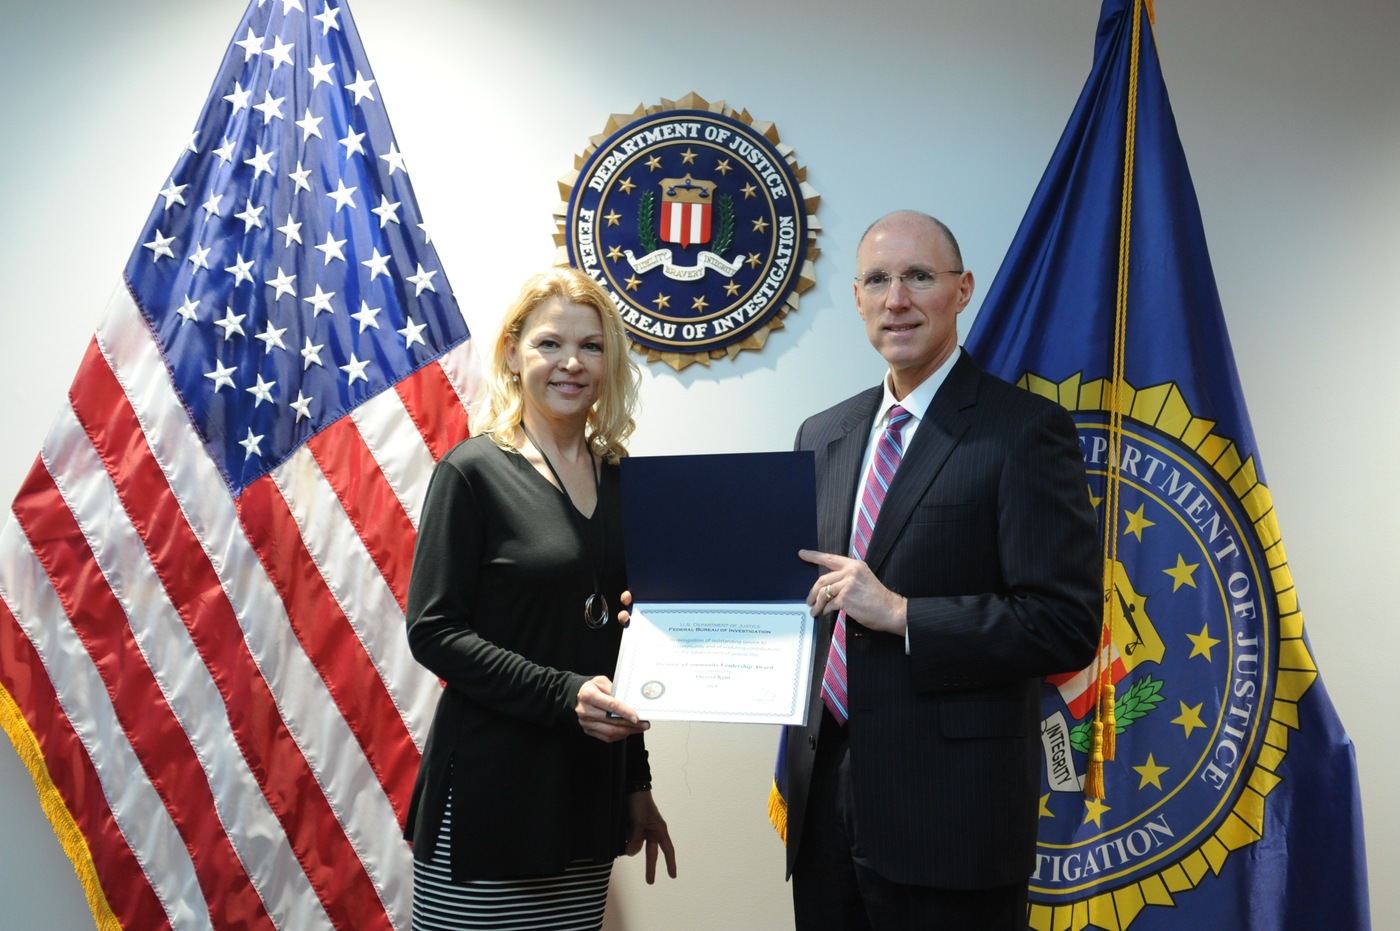 SAC Robert E. Hughes presents a DCLA certificate to Milwaukee recipient Theresa Kent. She will receive the DCLA award from FBI Director Christopher A. Wray in Washington, D.C. on May 1, 2020.